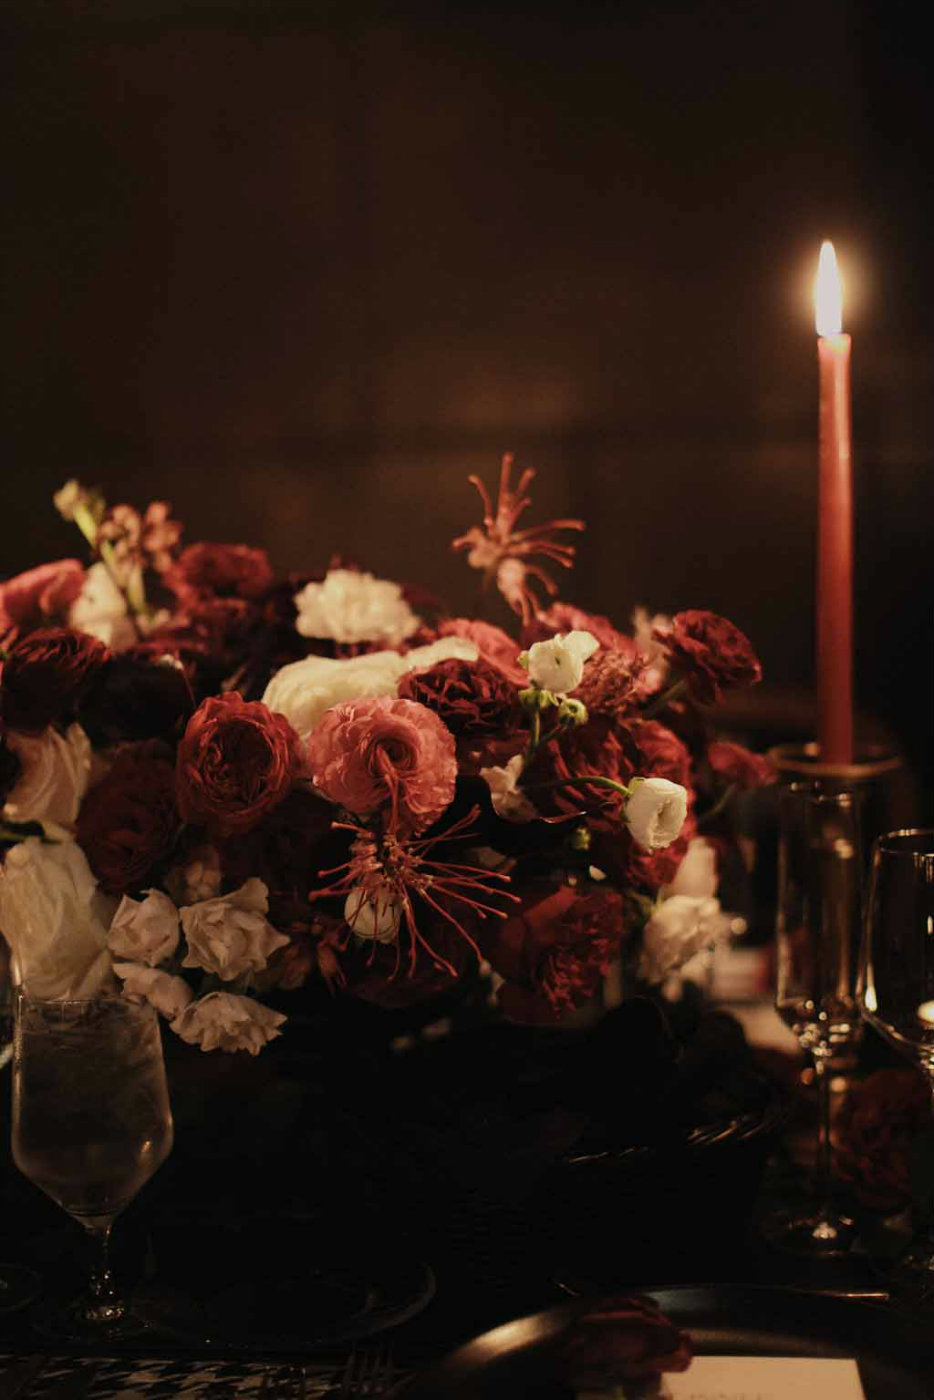 Burgundy ranunculus and cream spray roses with touches of red grevillea make up these centerpieces.